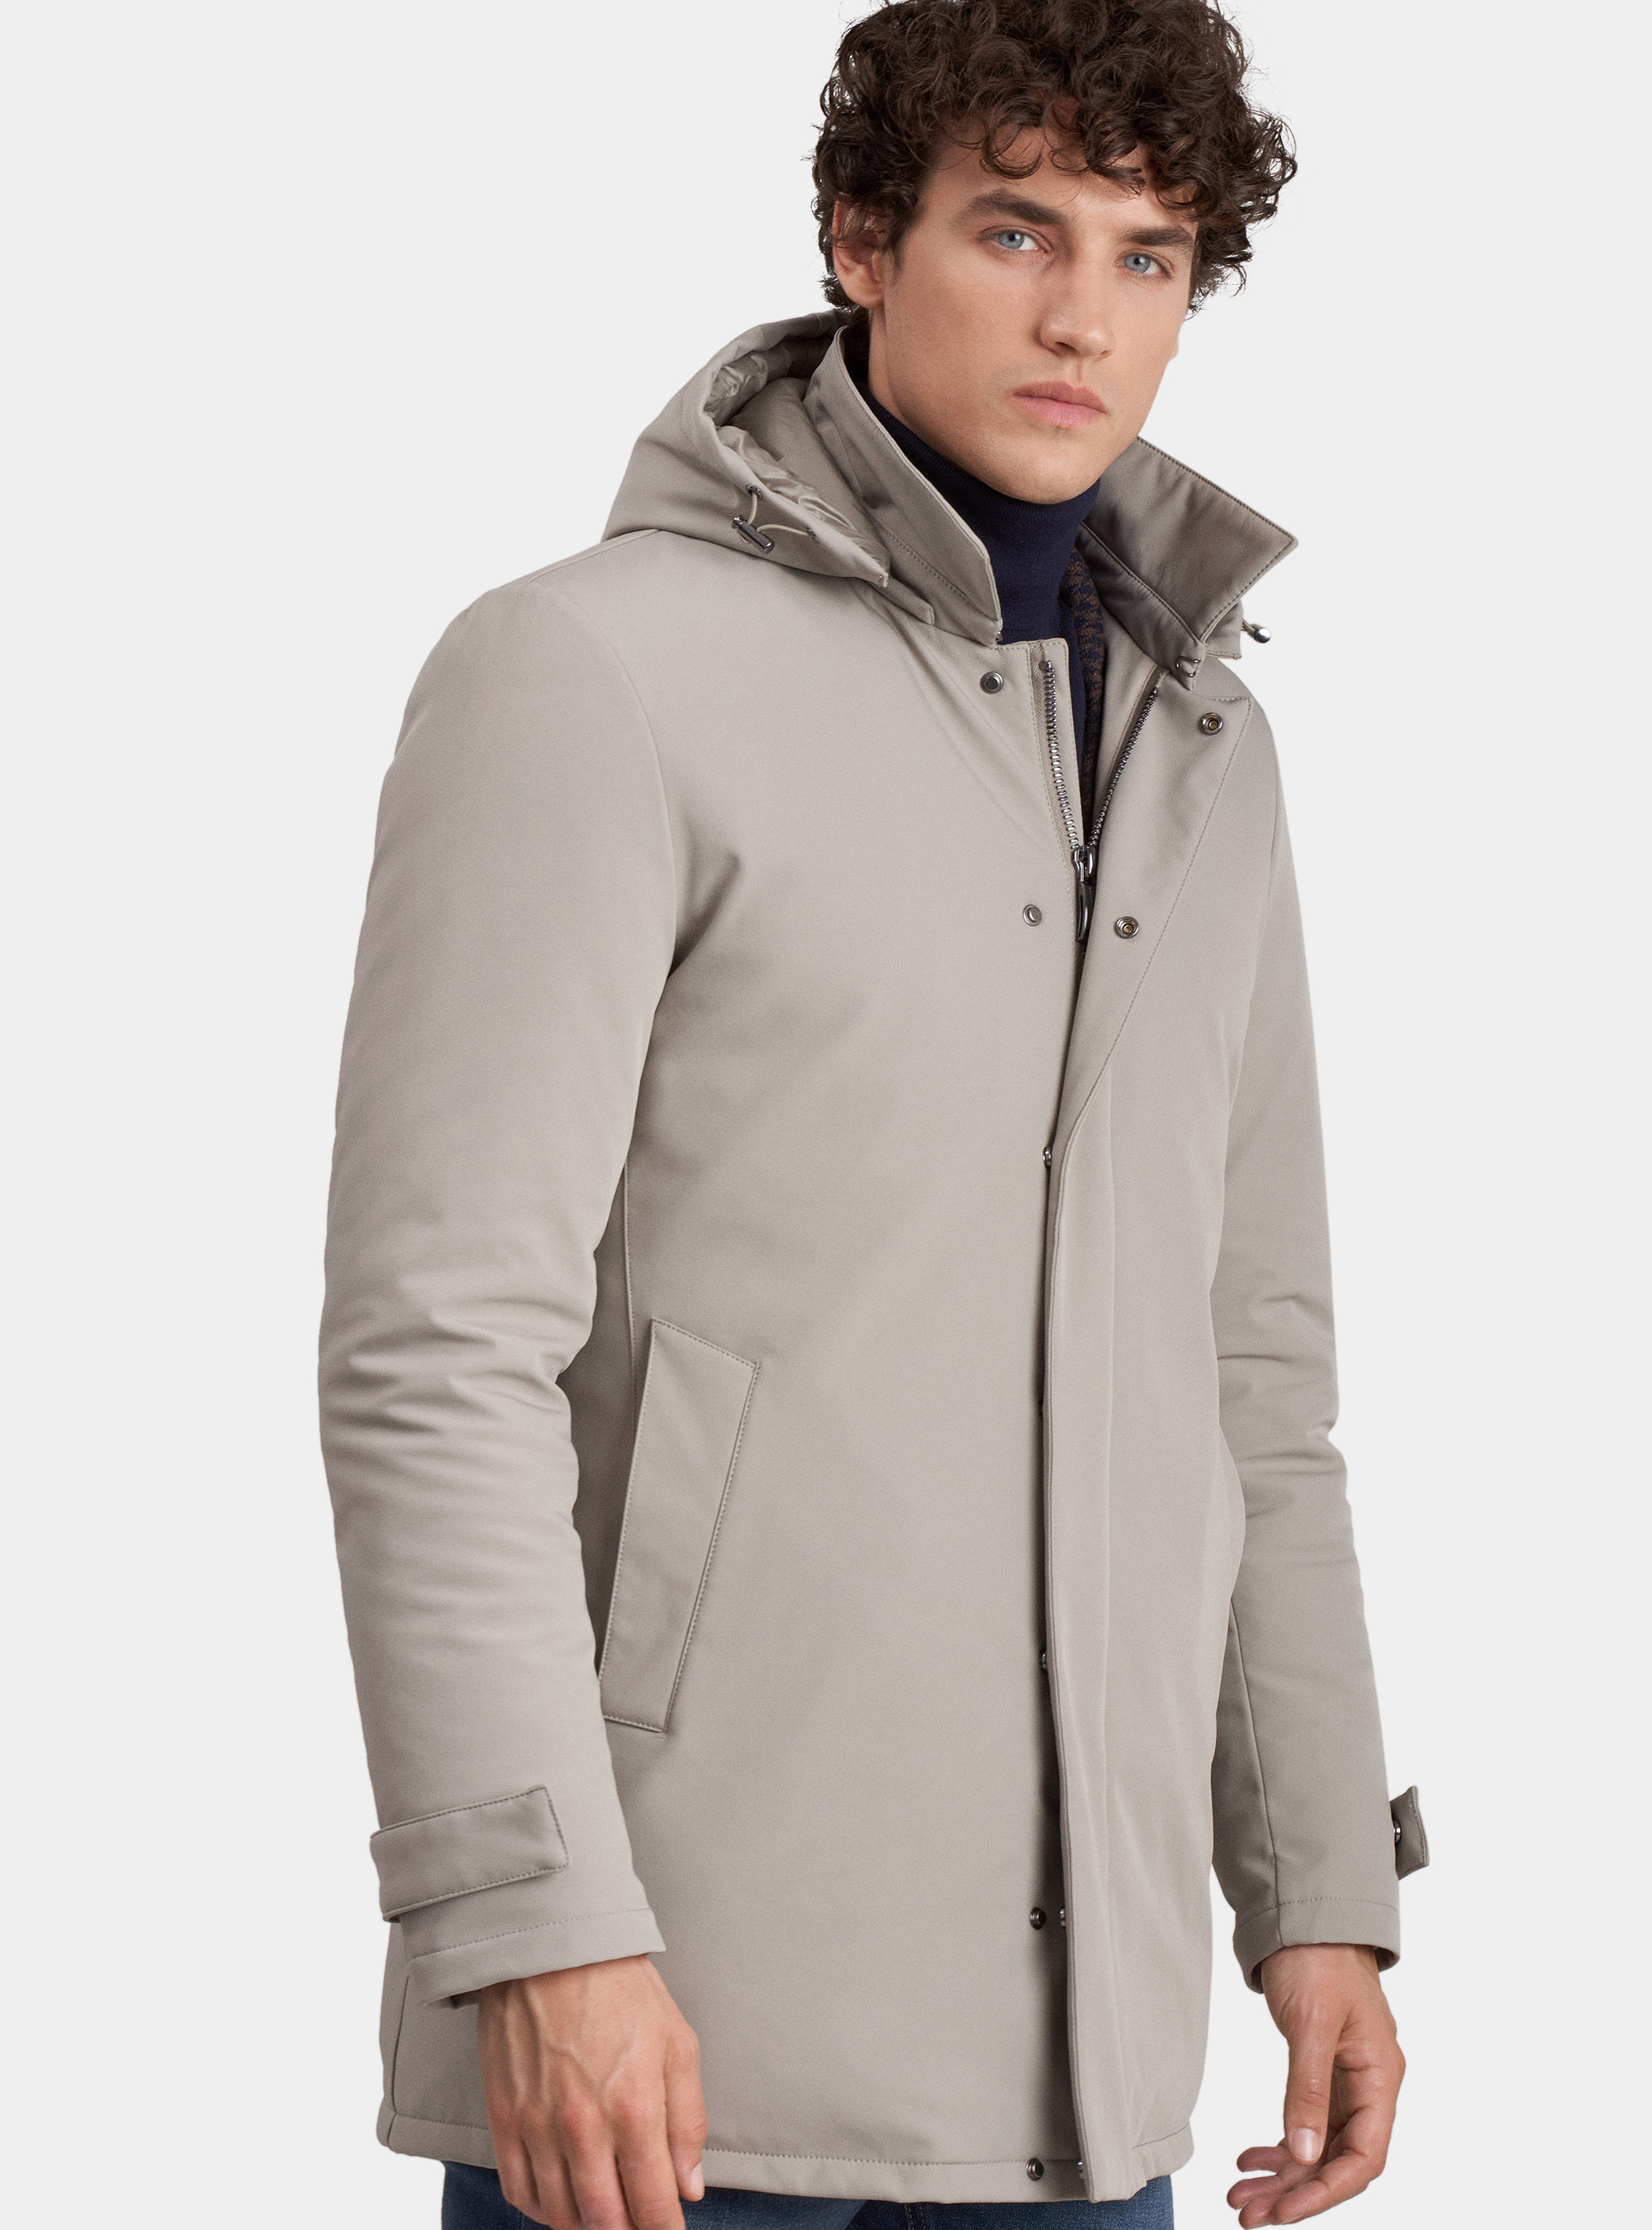 Padded technical jacket with removable hood